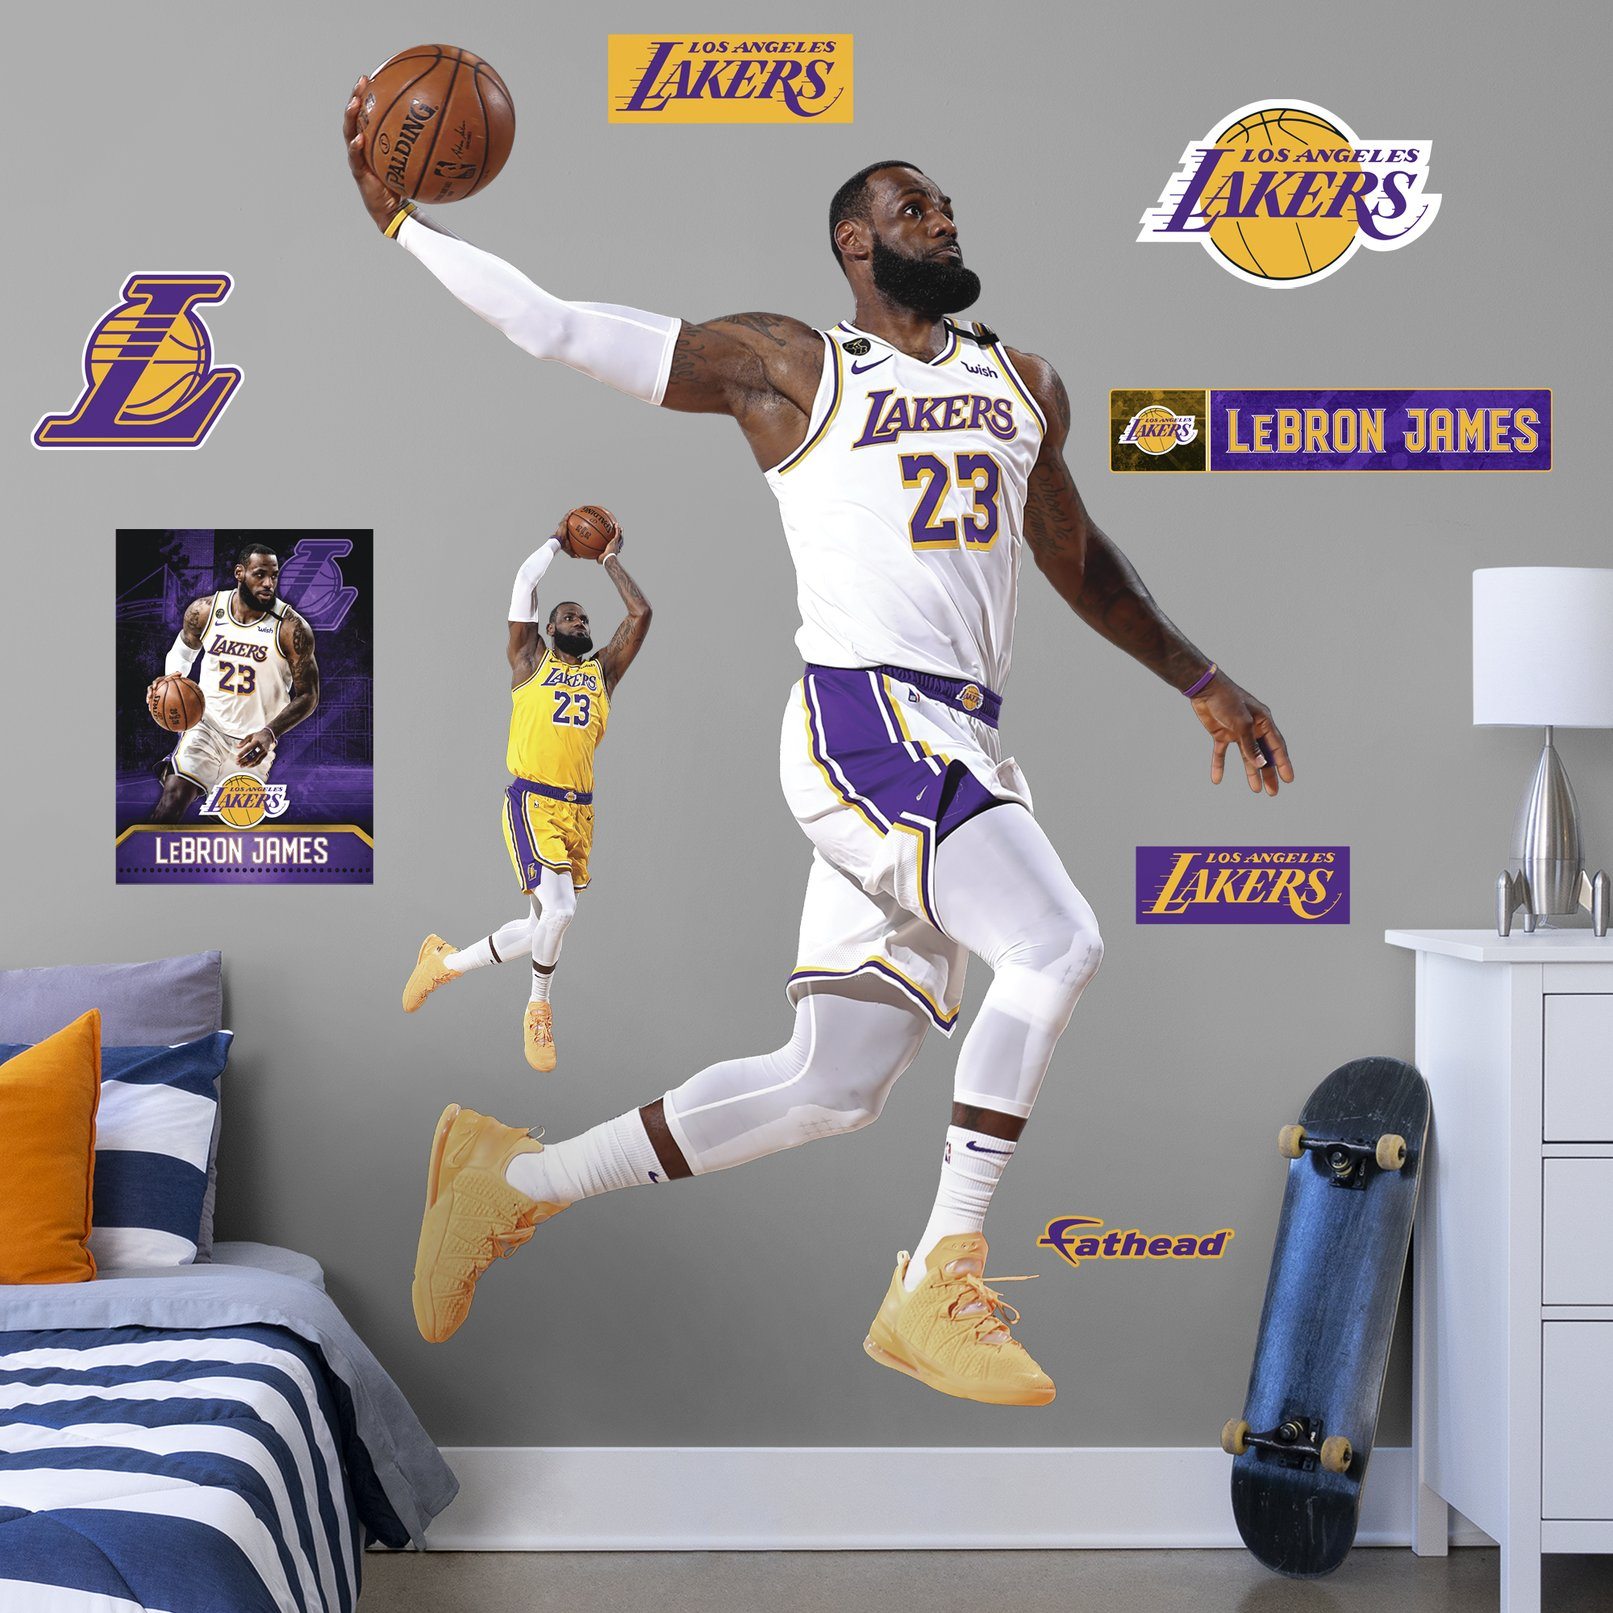 https://fathead.com/collections/sports-stars-homepage/products/m1900-01628-001?variant=33439184814168